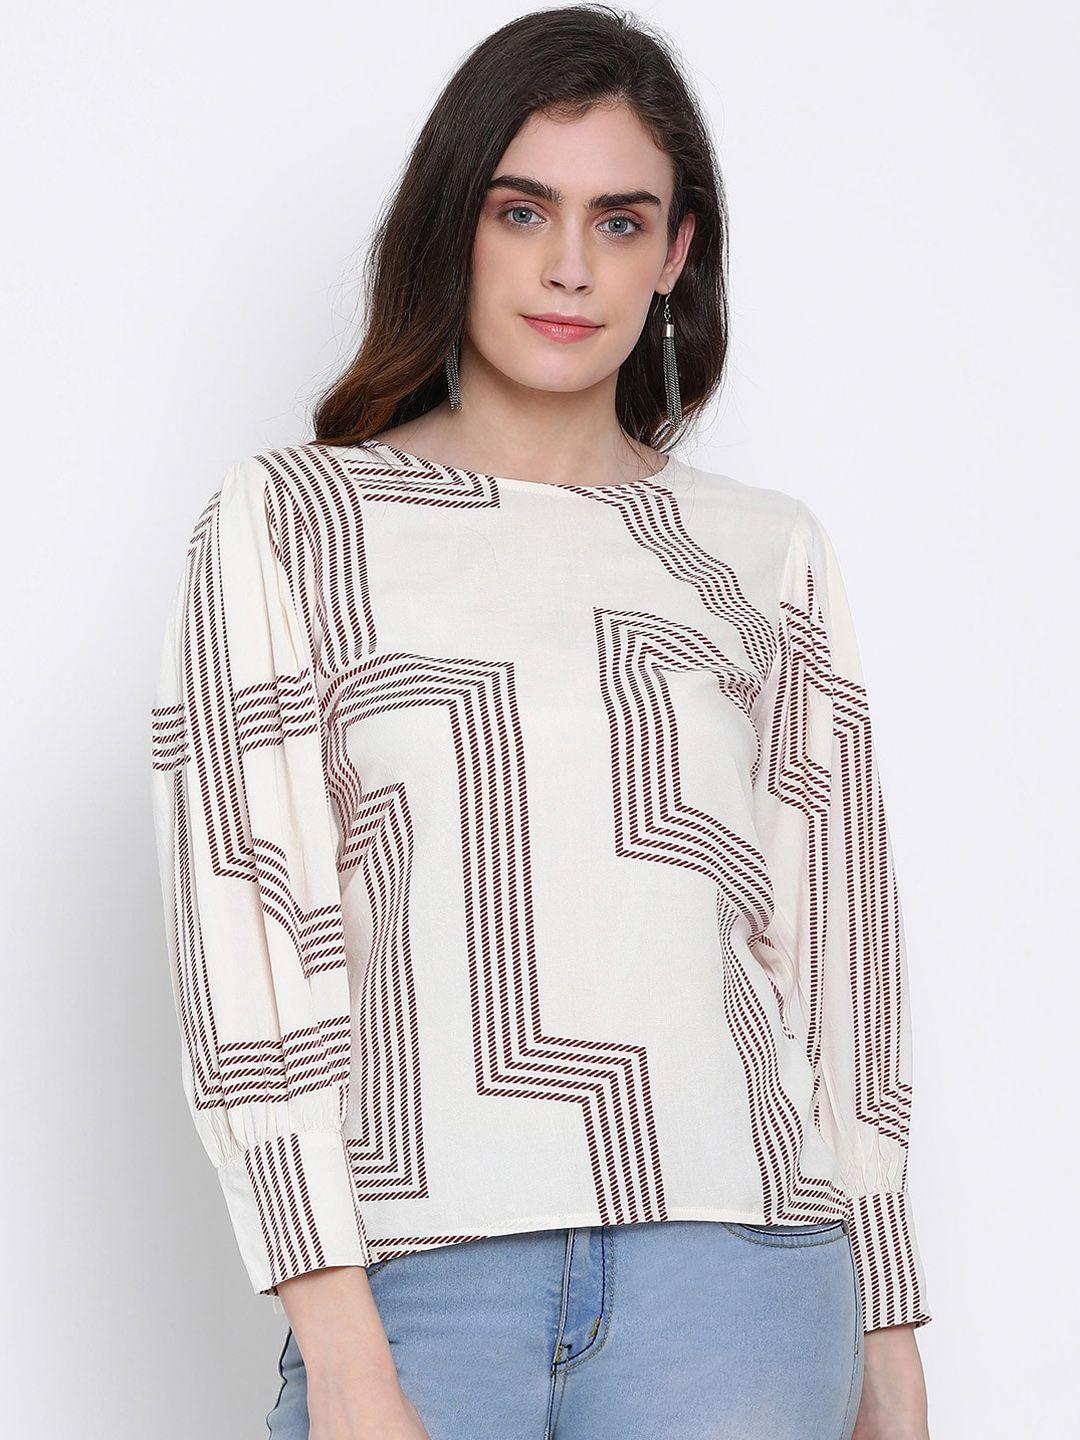 oxolloxo-women-off-white-printed-top